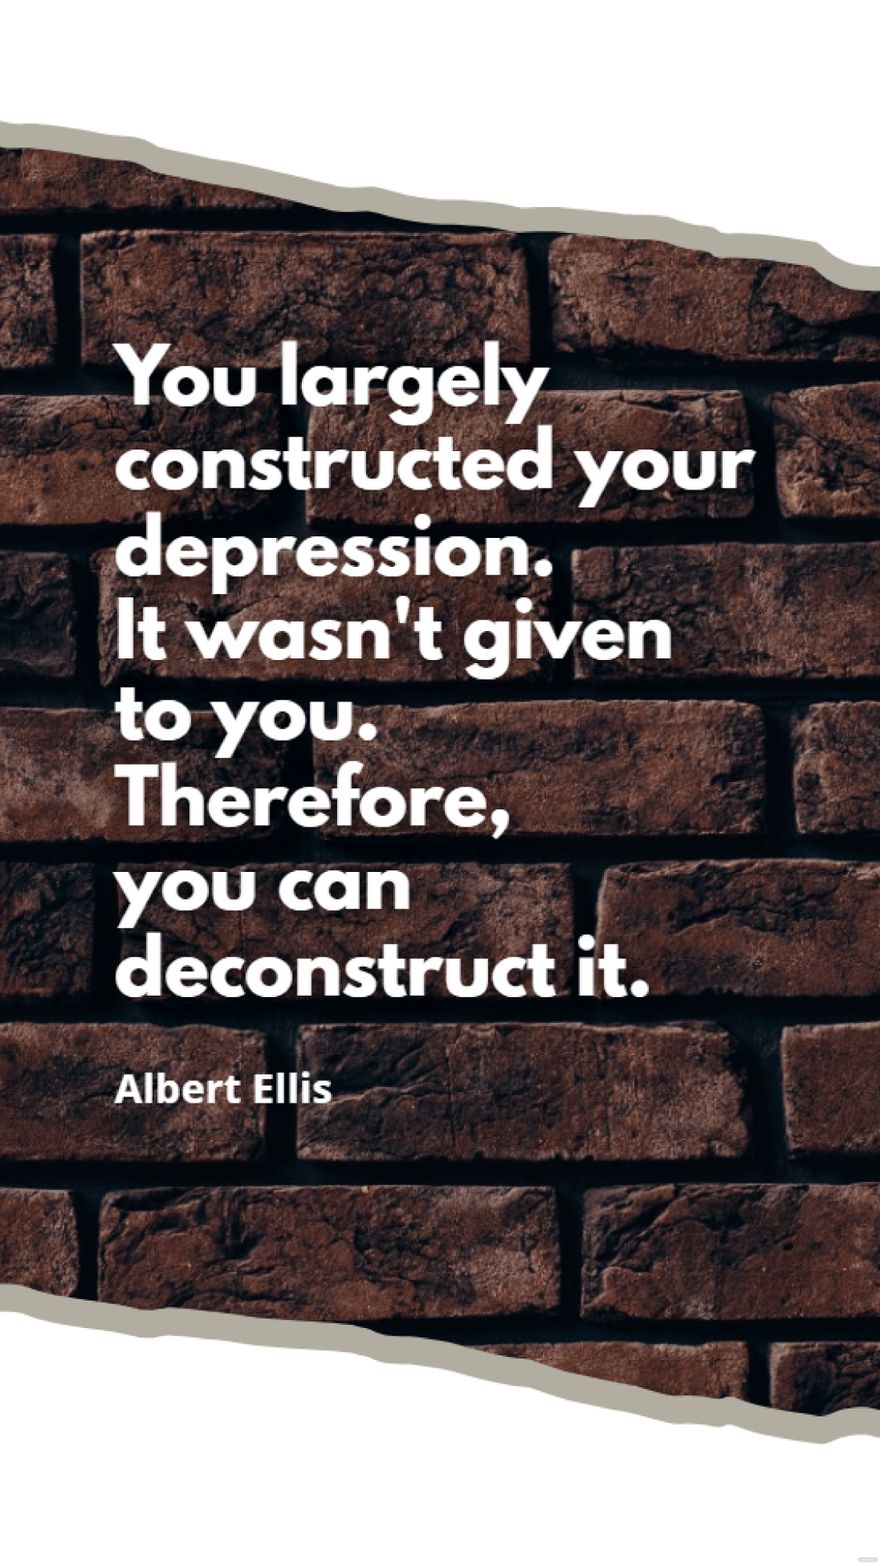 Albert Ellis - You largely constructed your depression. It wasn't given to you. Therefore, you can deconstruct it.